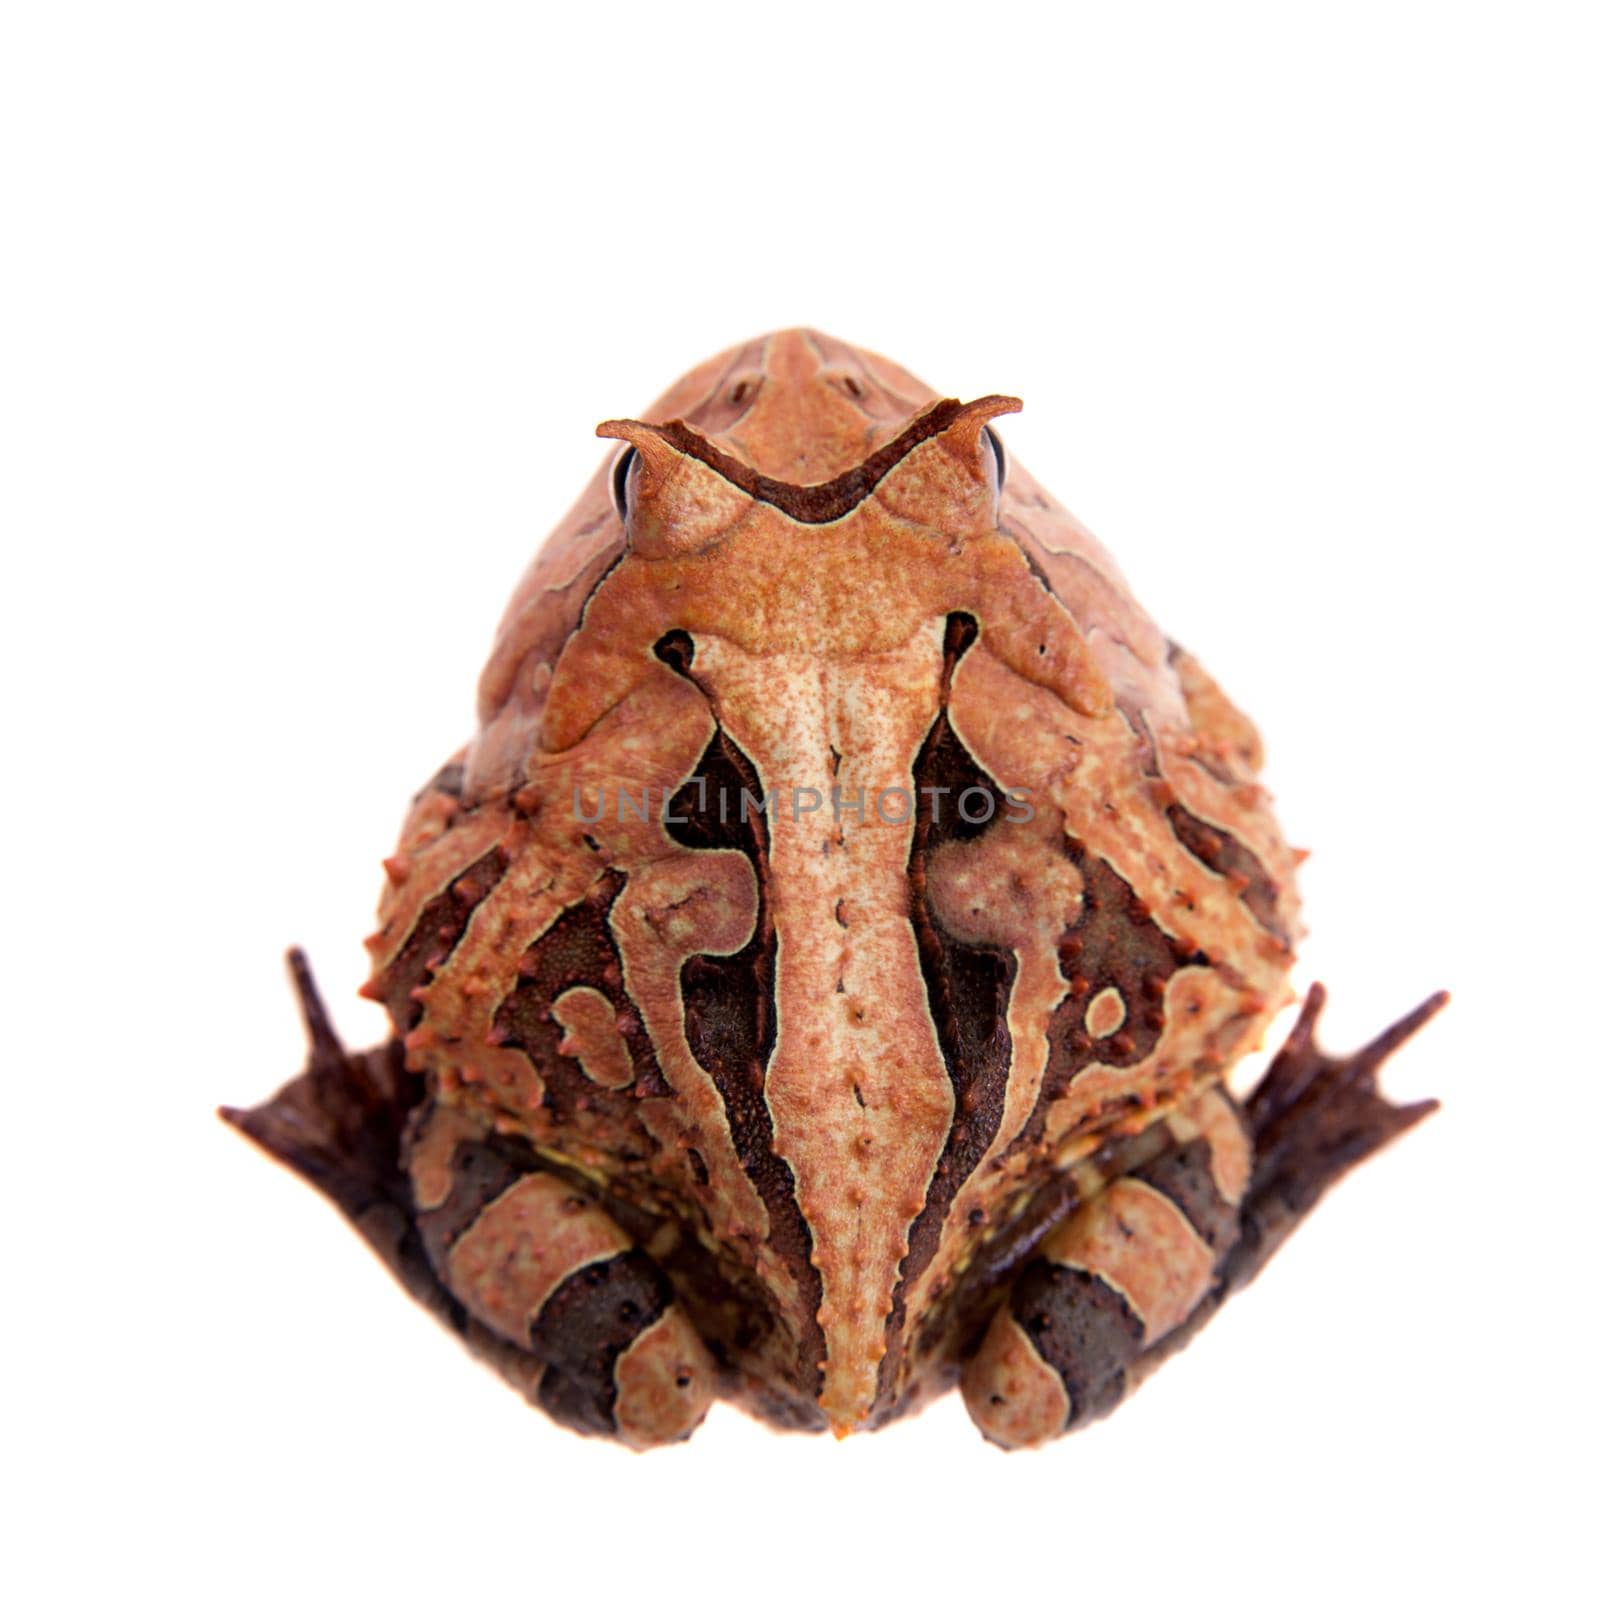 The Surinam horned frog isolated on white by RosaJay